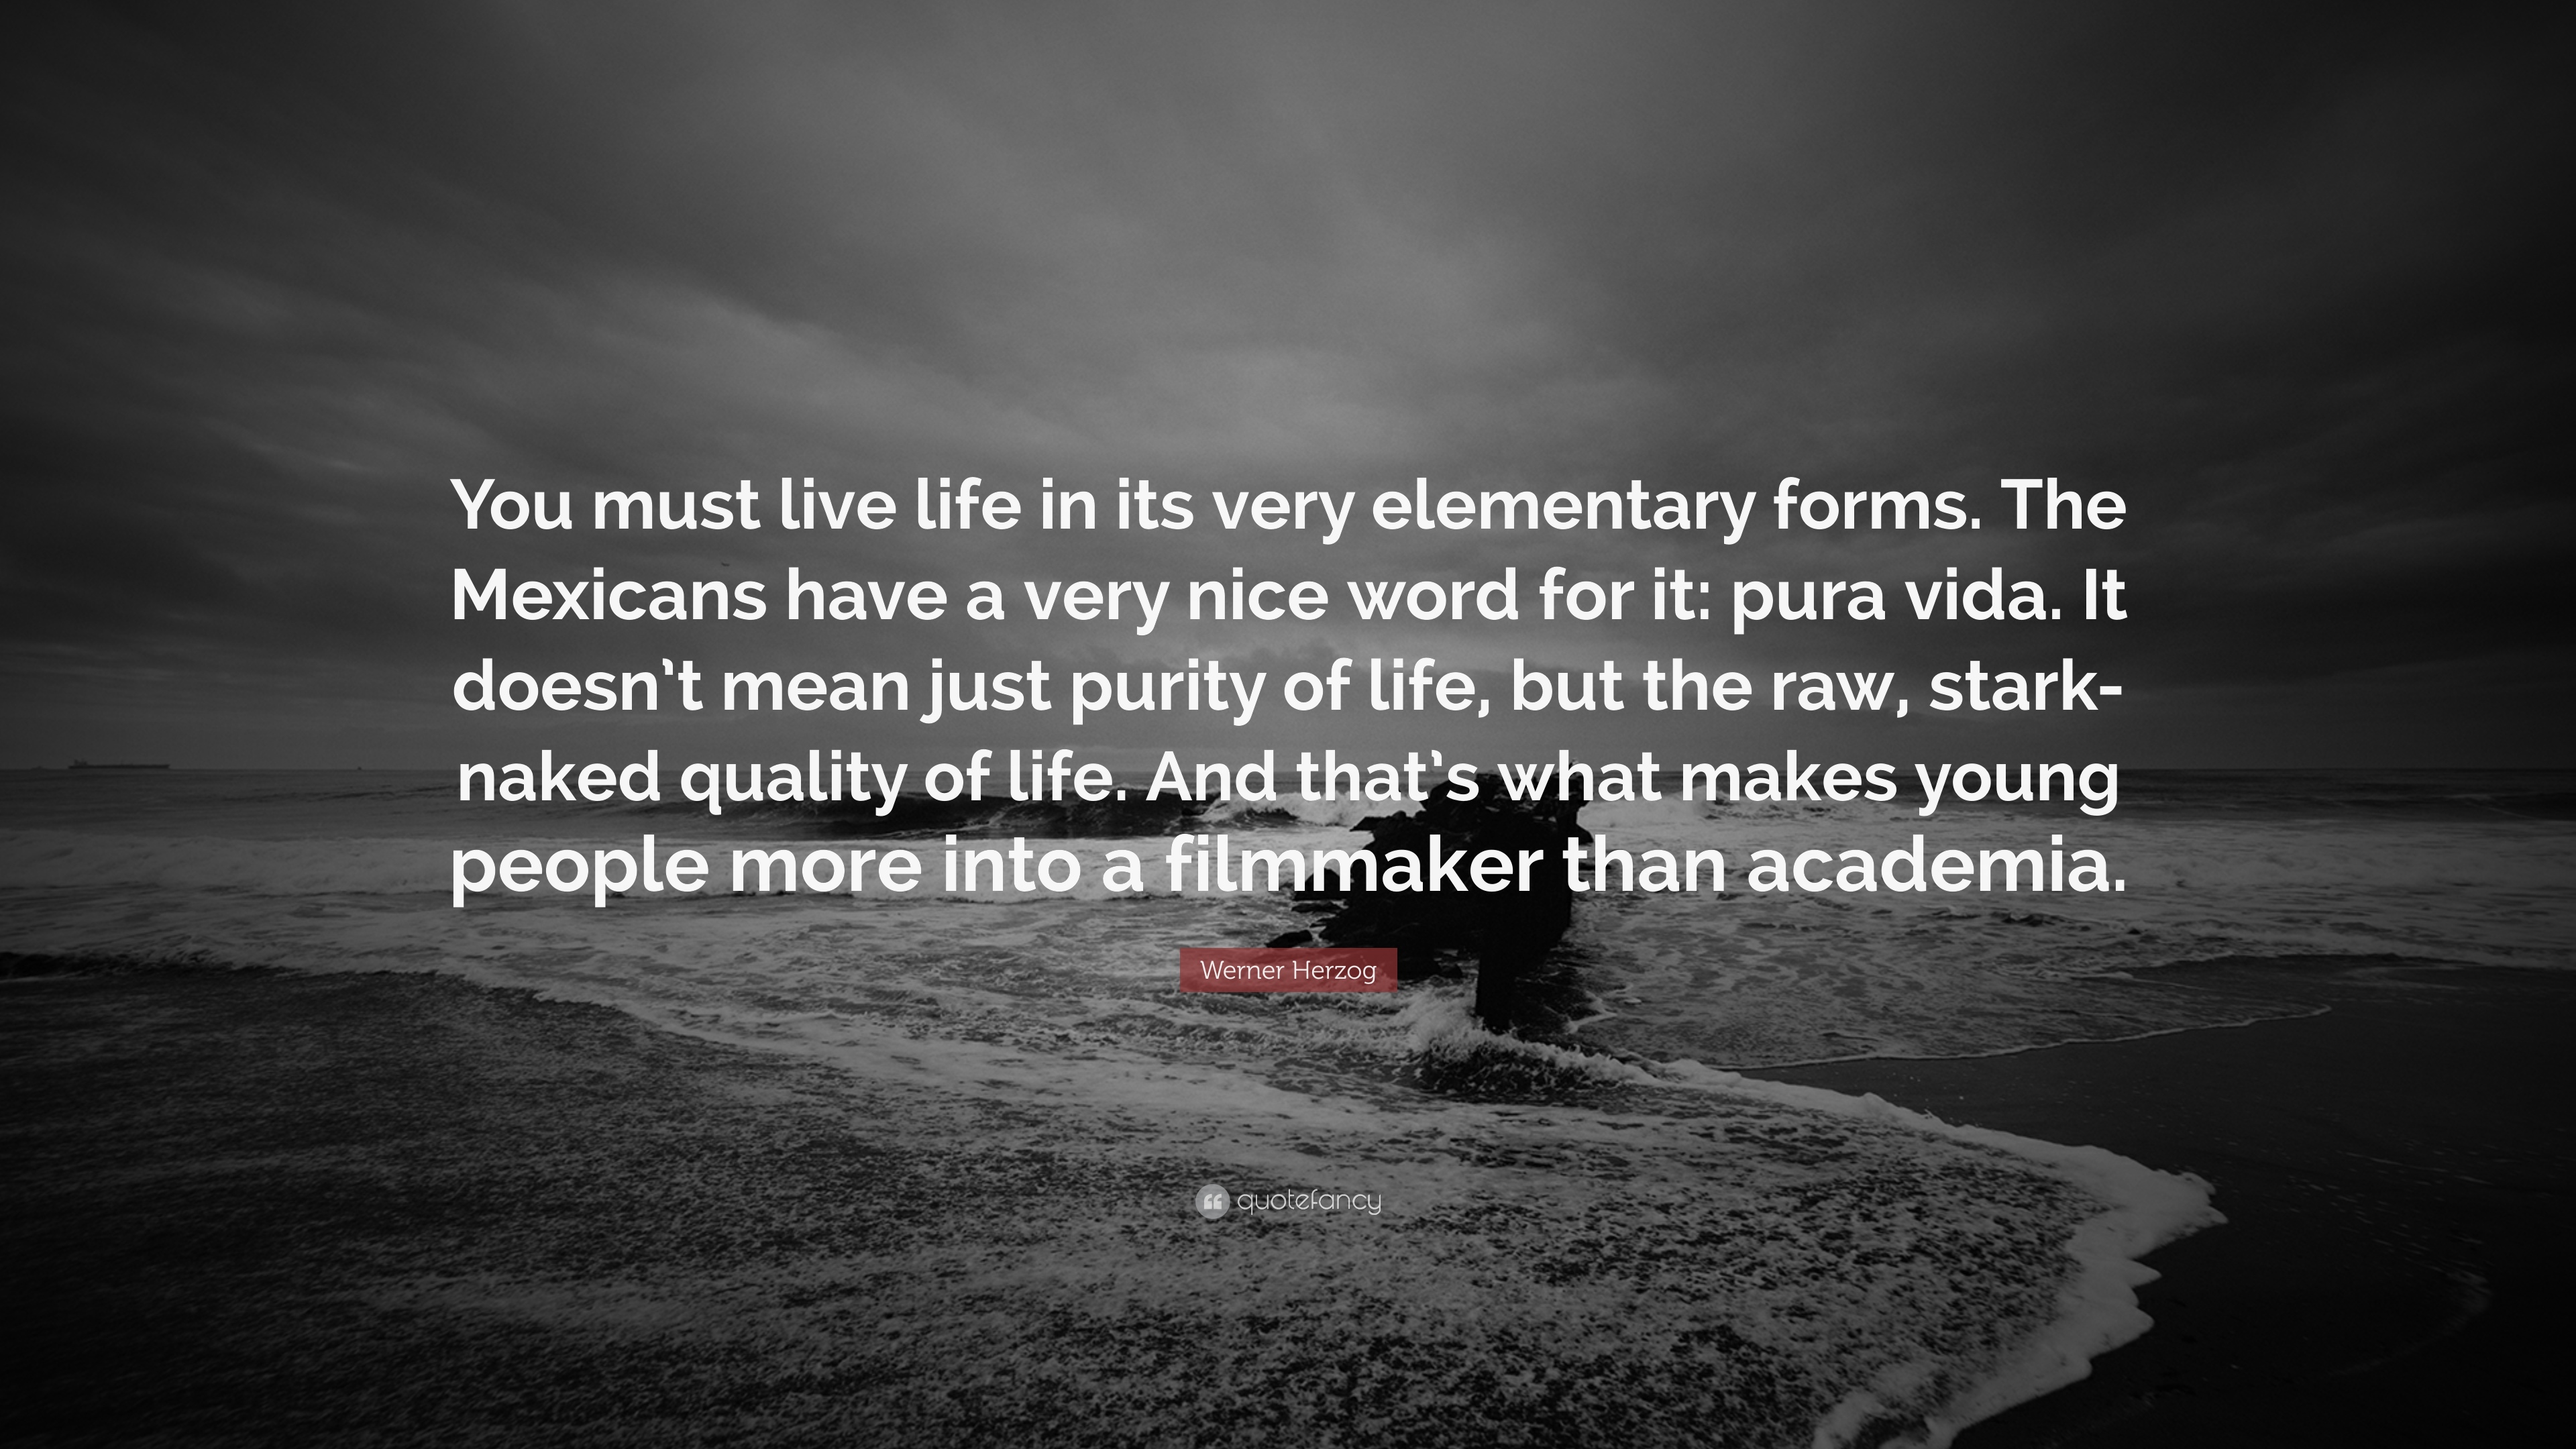 Werner Herzog Quote: “You must live life in its very elementary